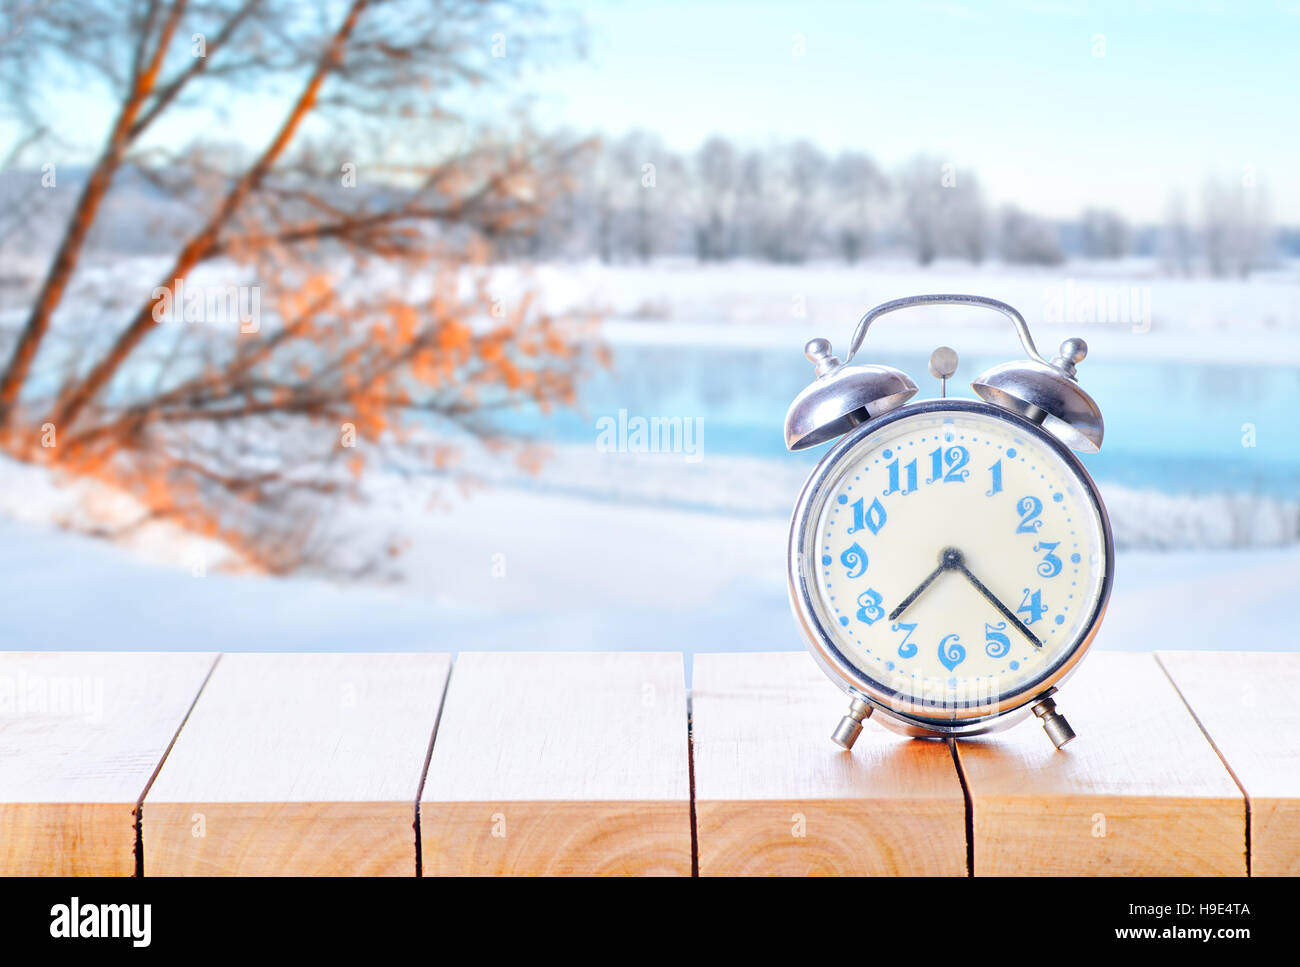 Vintage alarm clock on wooden table or bench on winter season background. Return to winter time. Fall back time. Daylight savings end Stock Photo